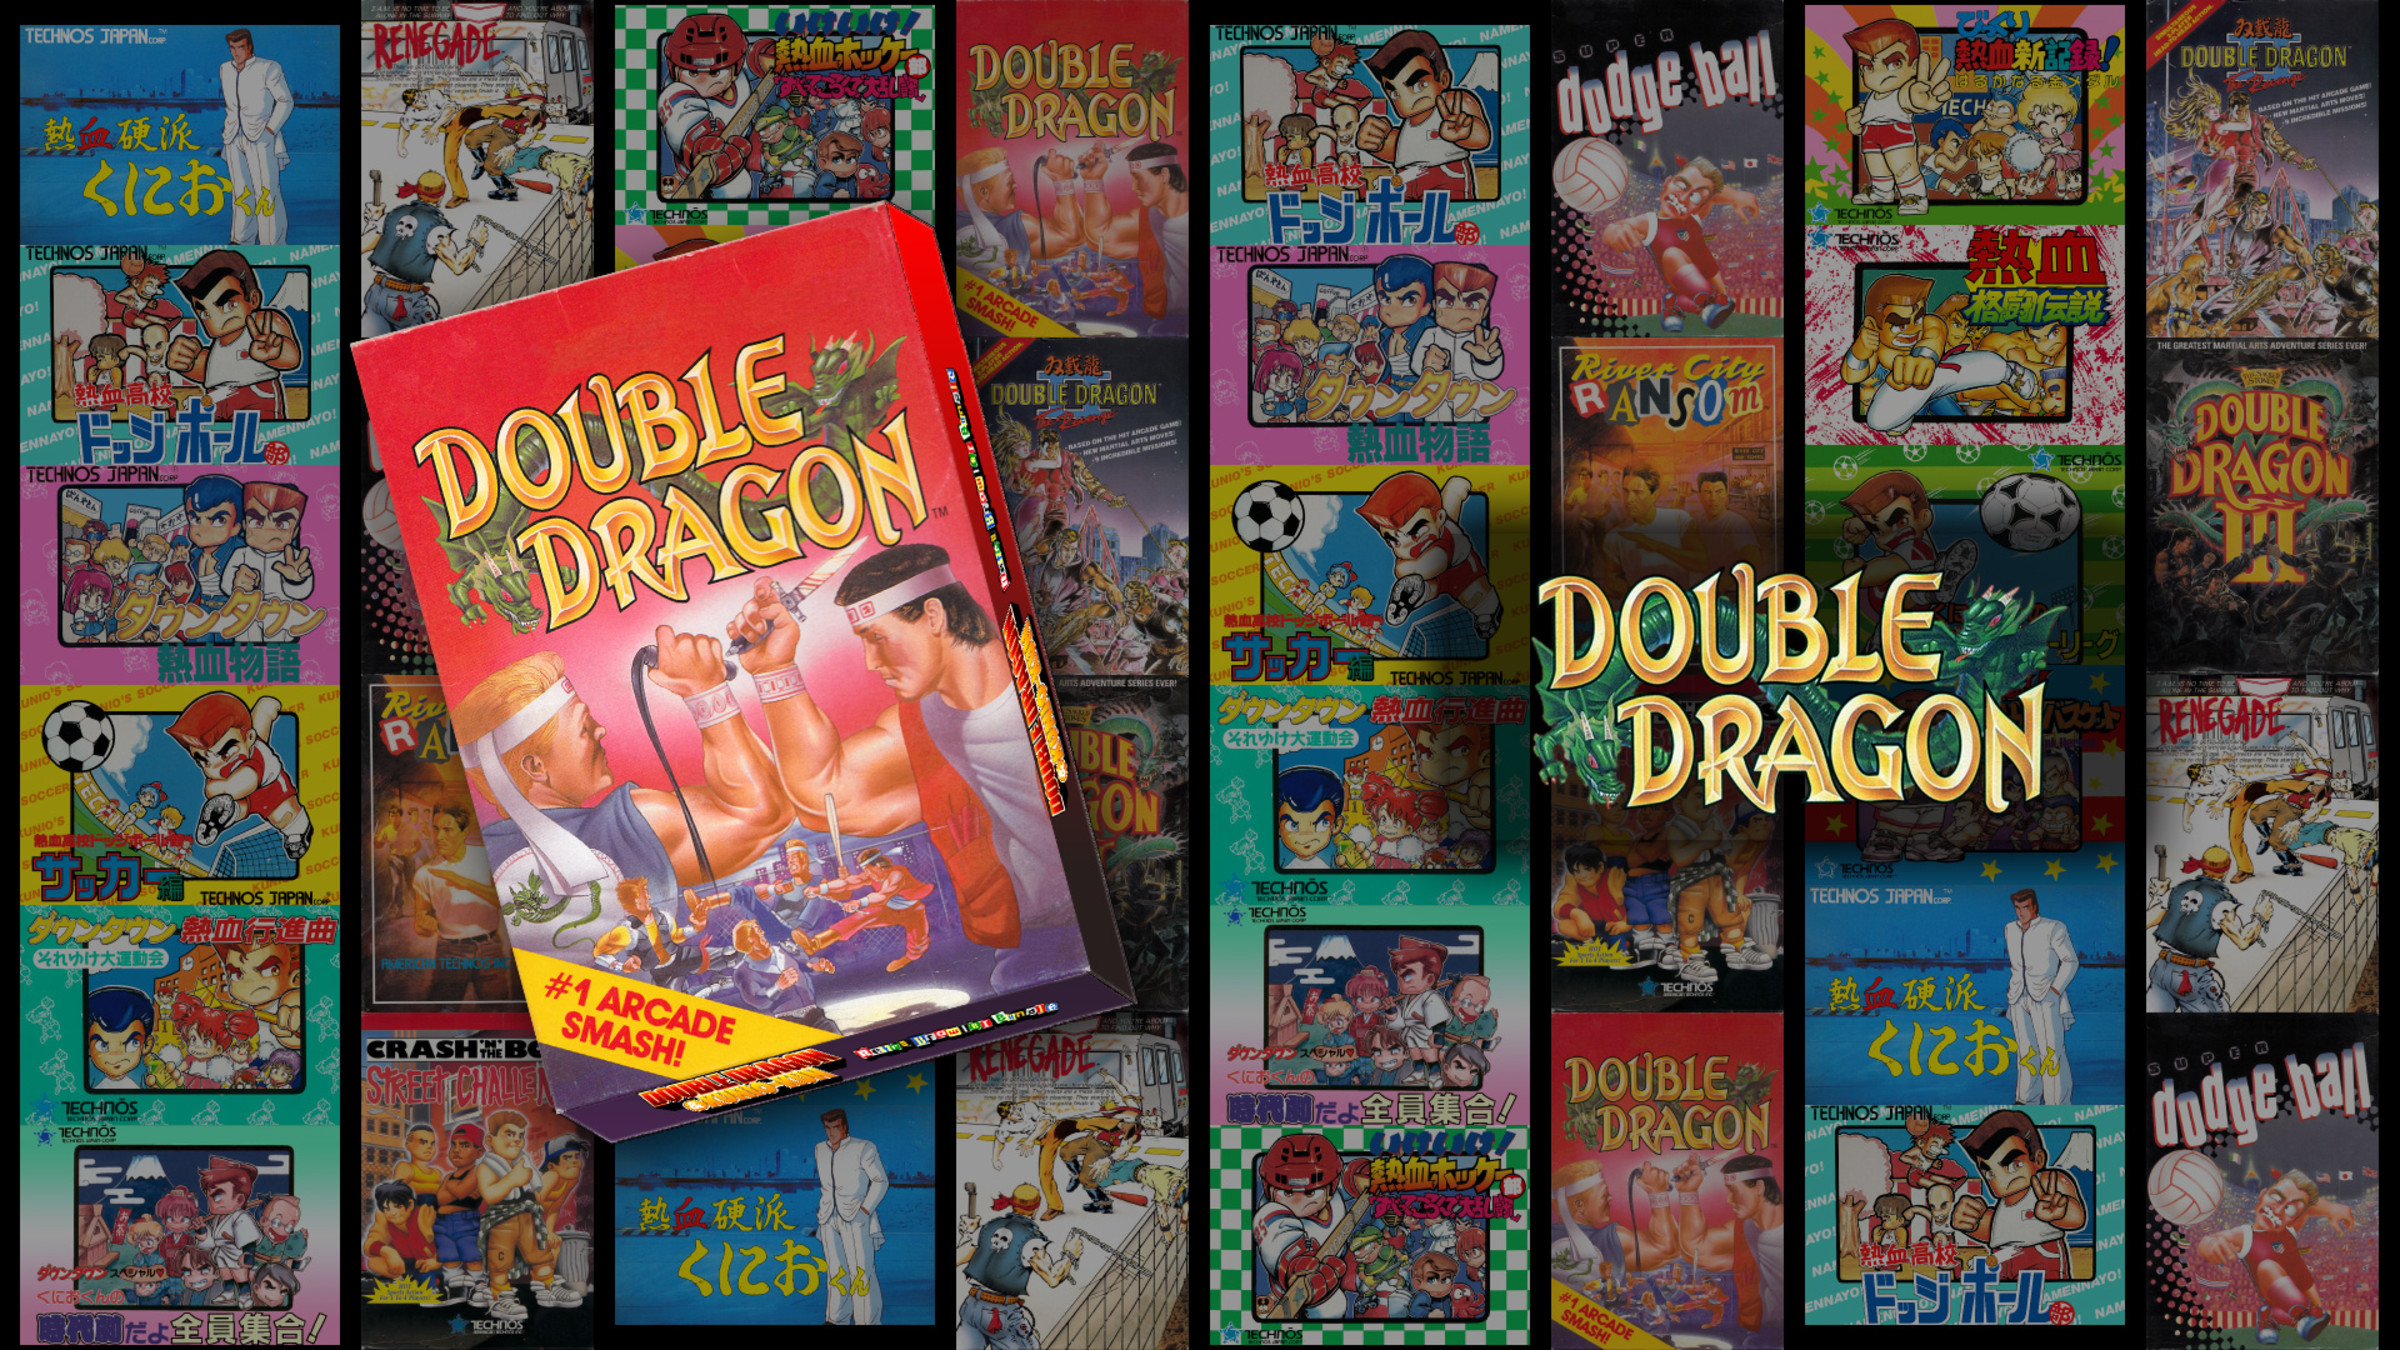 Nintendo Switch Game Double Dragon Collection (MULTI